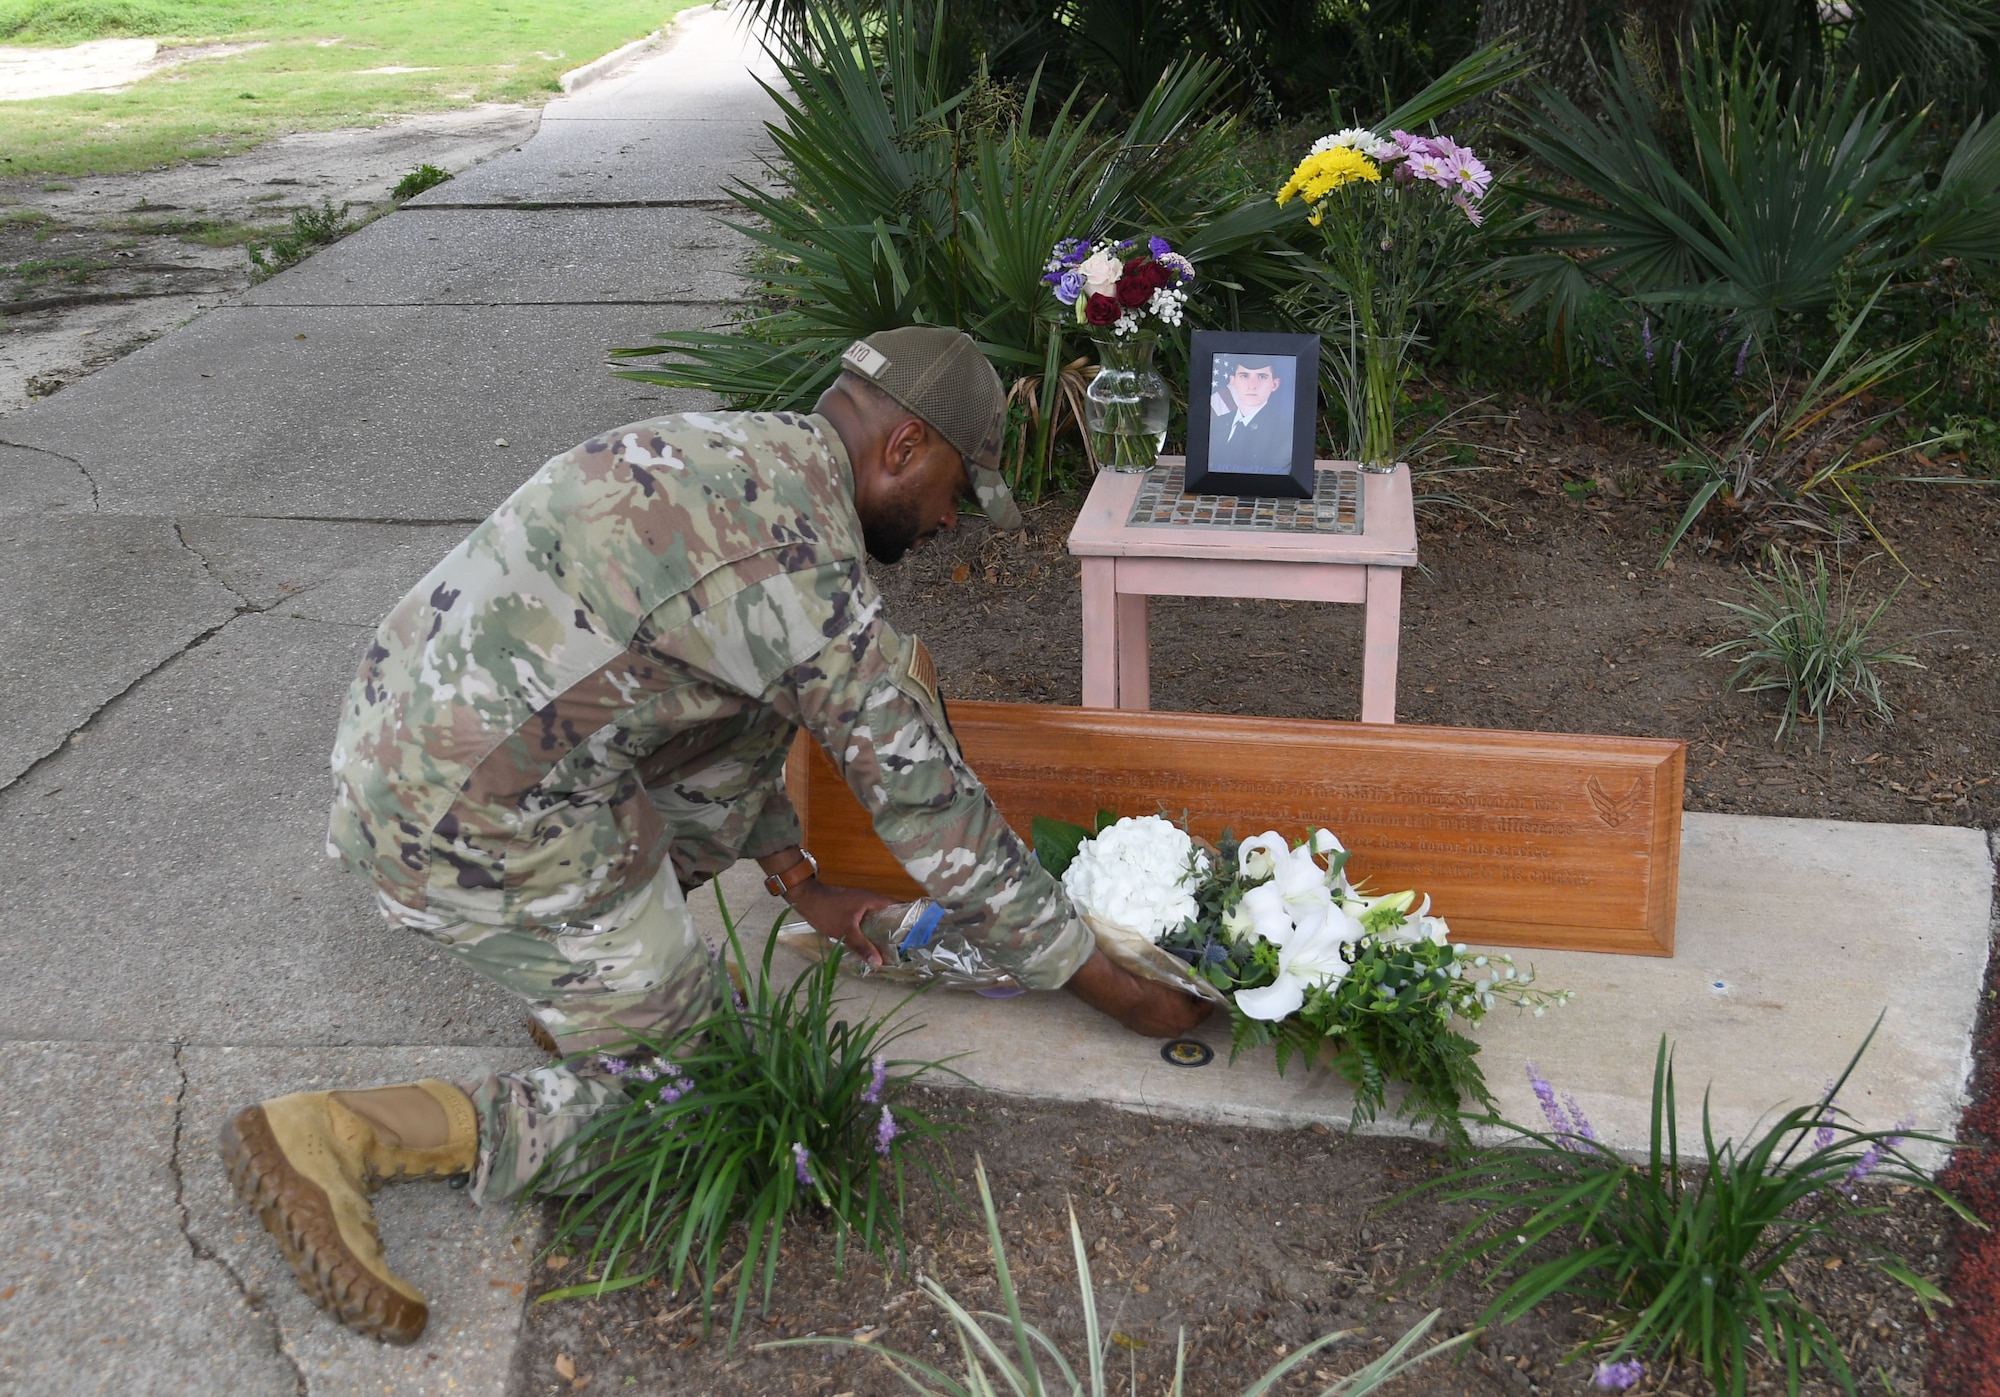 U.S. Air Force Tech. Sgt. Louis Lacayo, 336th Training Squadron instructor, places a bouquet of flowers during a remembrance ceremony for Airman Daniel Germenis at Keesler Air Force Base, Mississippi, July 28, 2022. Germenis, who was assigned to the 336th Training Squadron, was remembered by members of the 81st Training Group on the one year anniversary of his passing. (U.S. Air Force photo by Kemberly Groue)